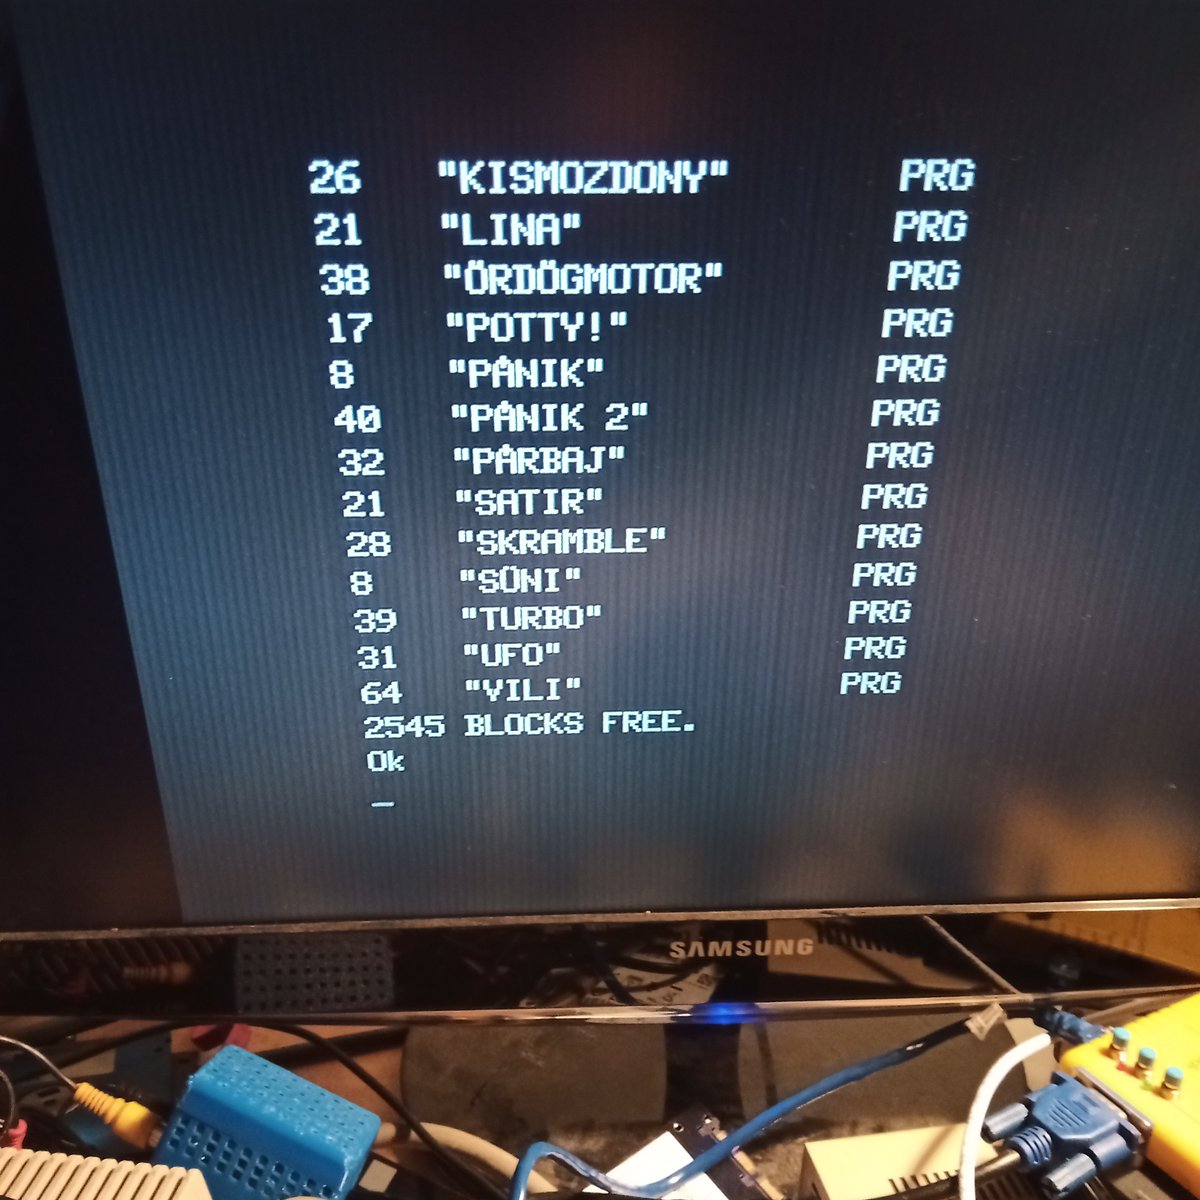 So, the Primo CDOS officially supports only commodore 1541 drives. That's true. But with simple 'hacking' it can use other drives too. :D
Primo rulez.